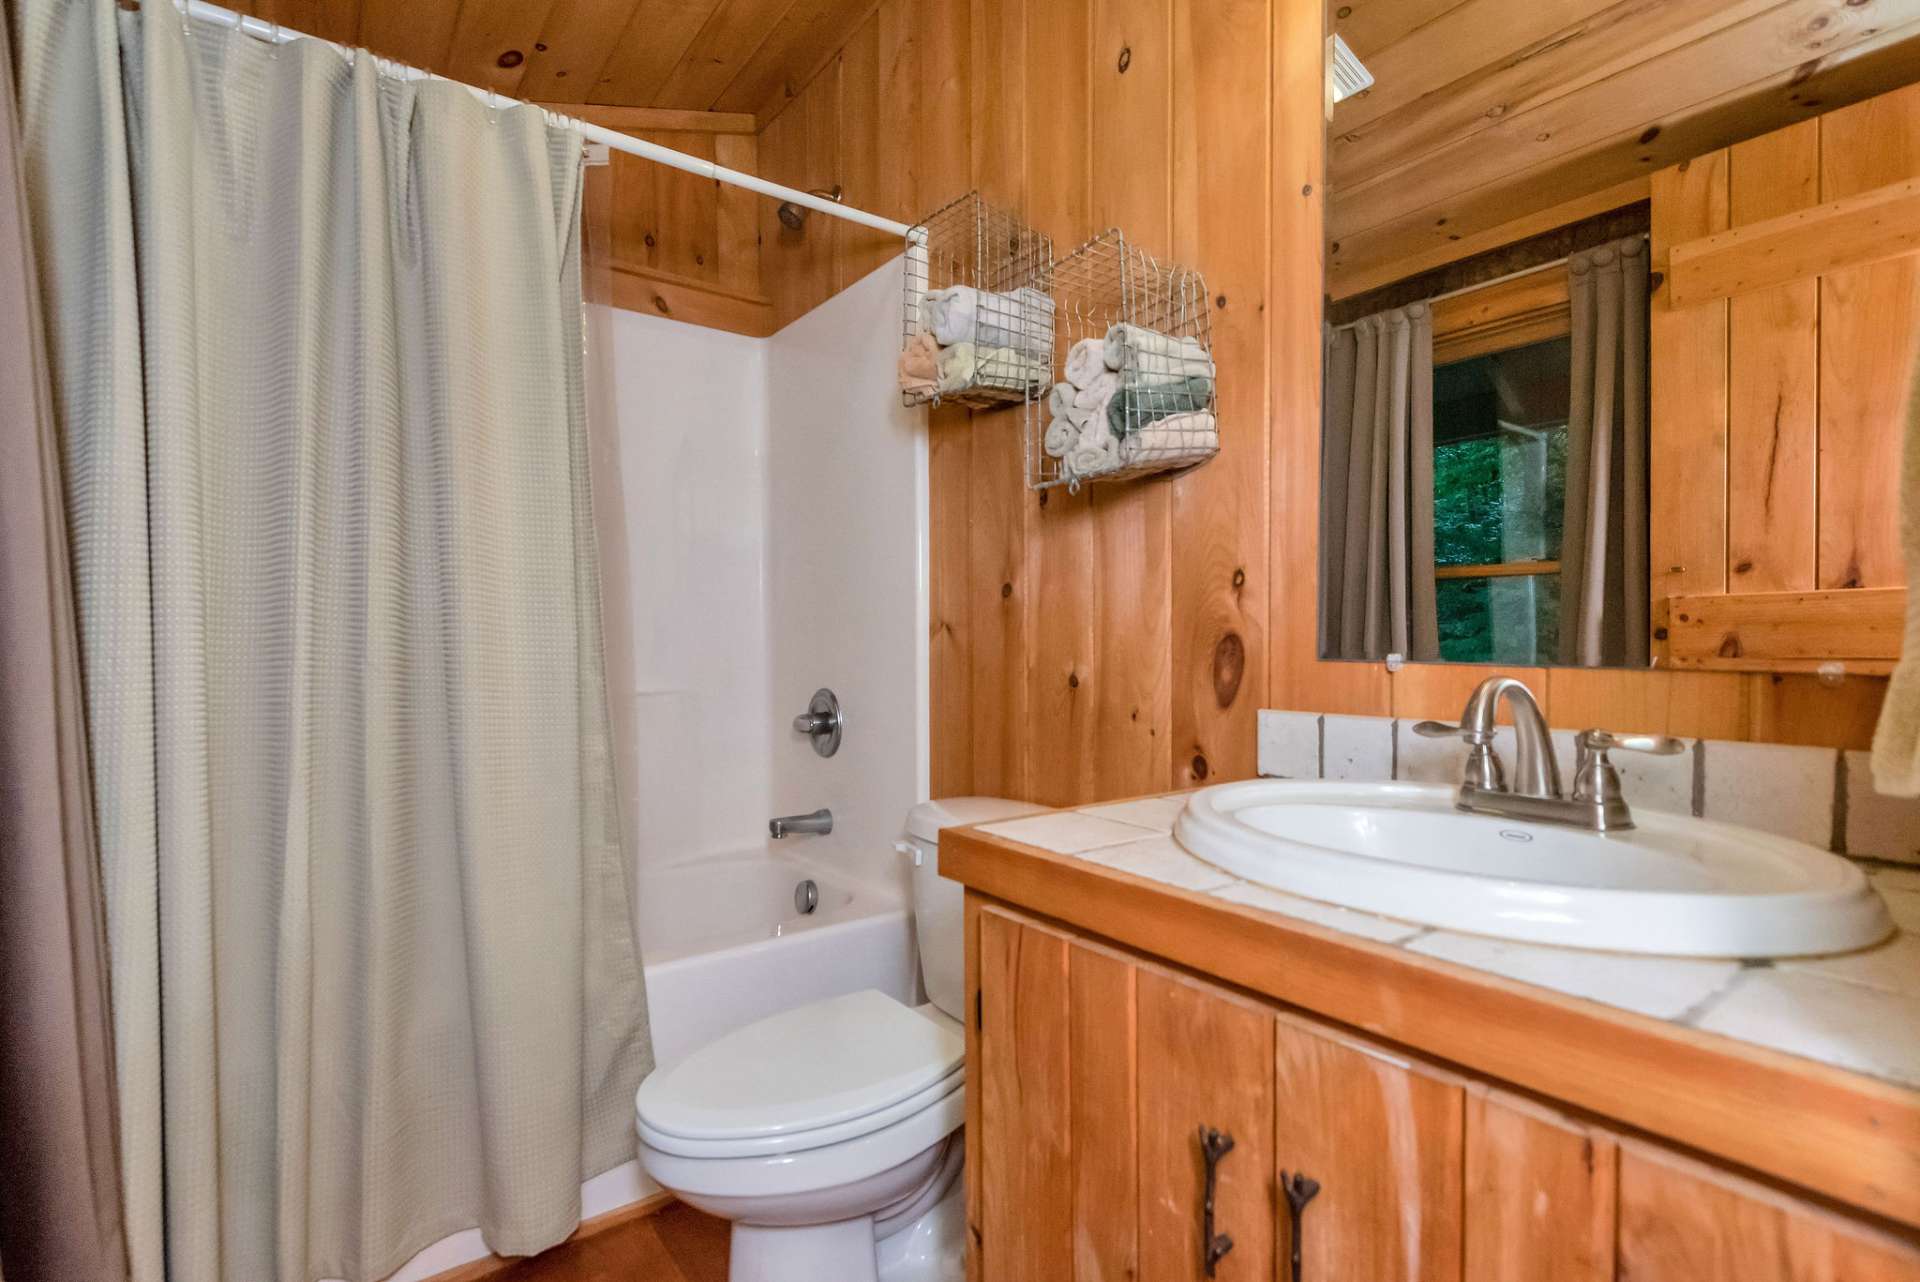 The loft features a full bath for the enjoyment of guests.